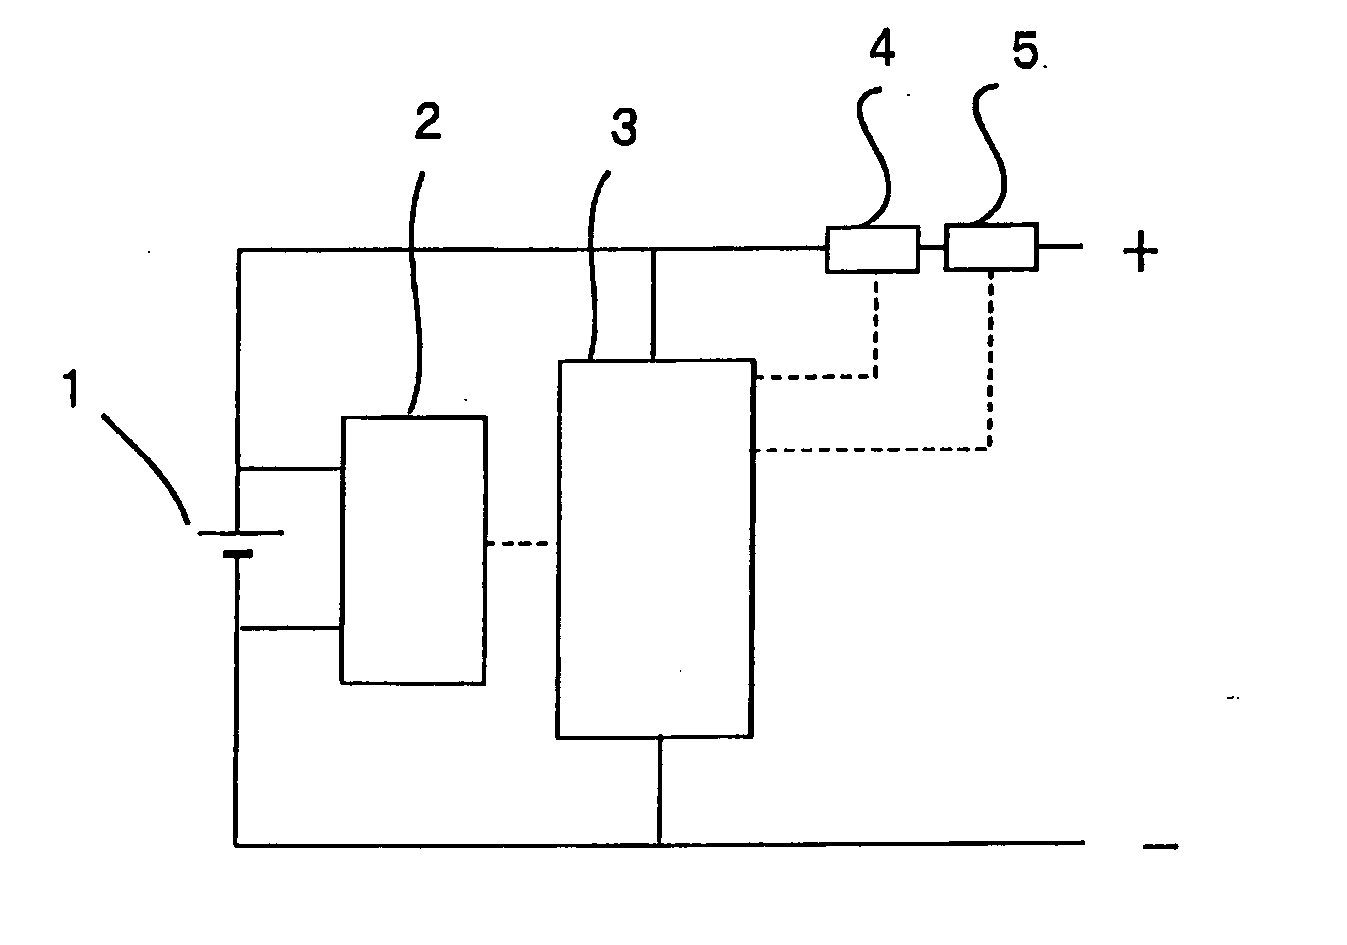 Method of charging and discharging a non-aqueous electrolyte secondary battery